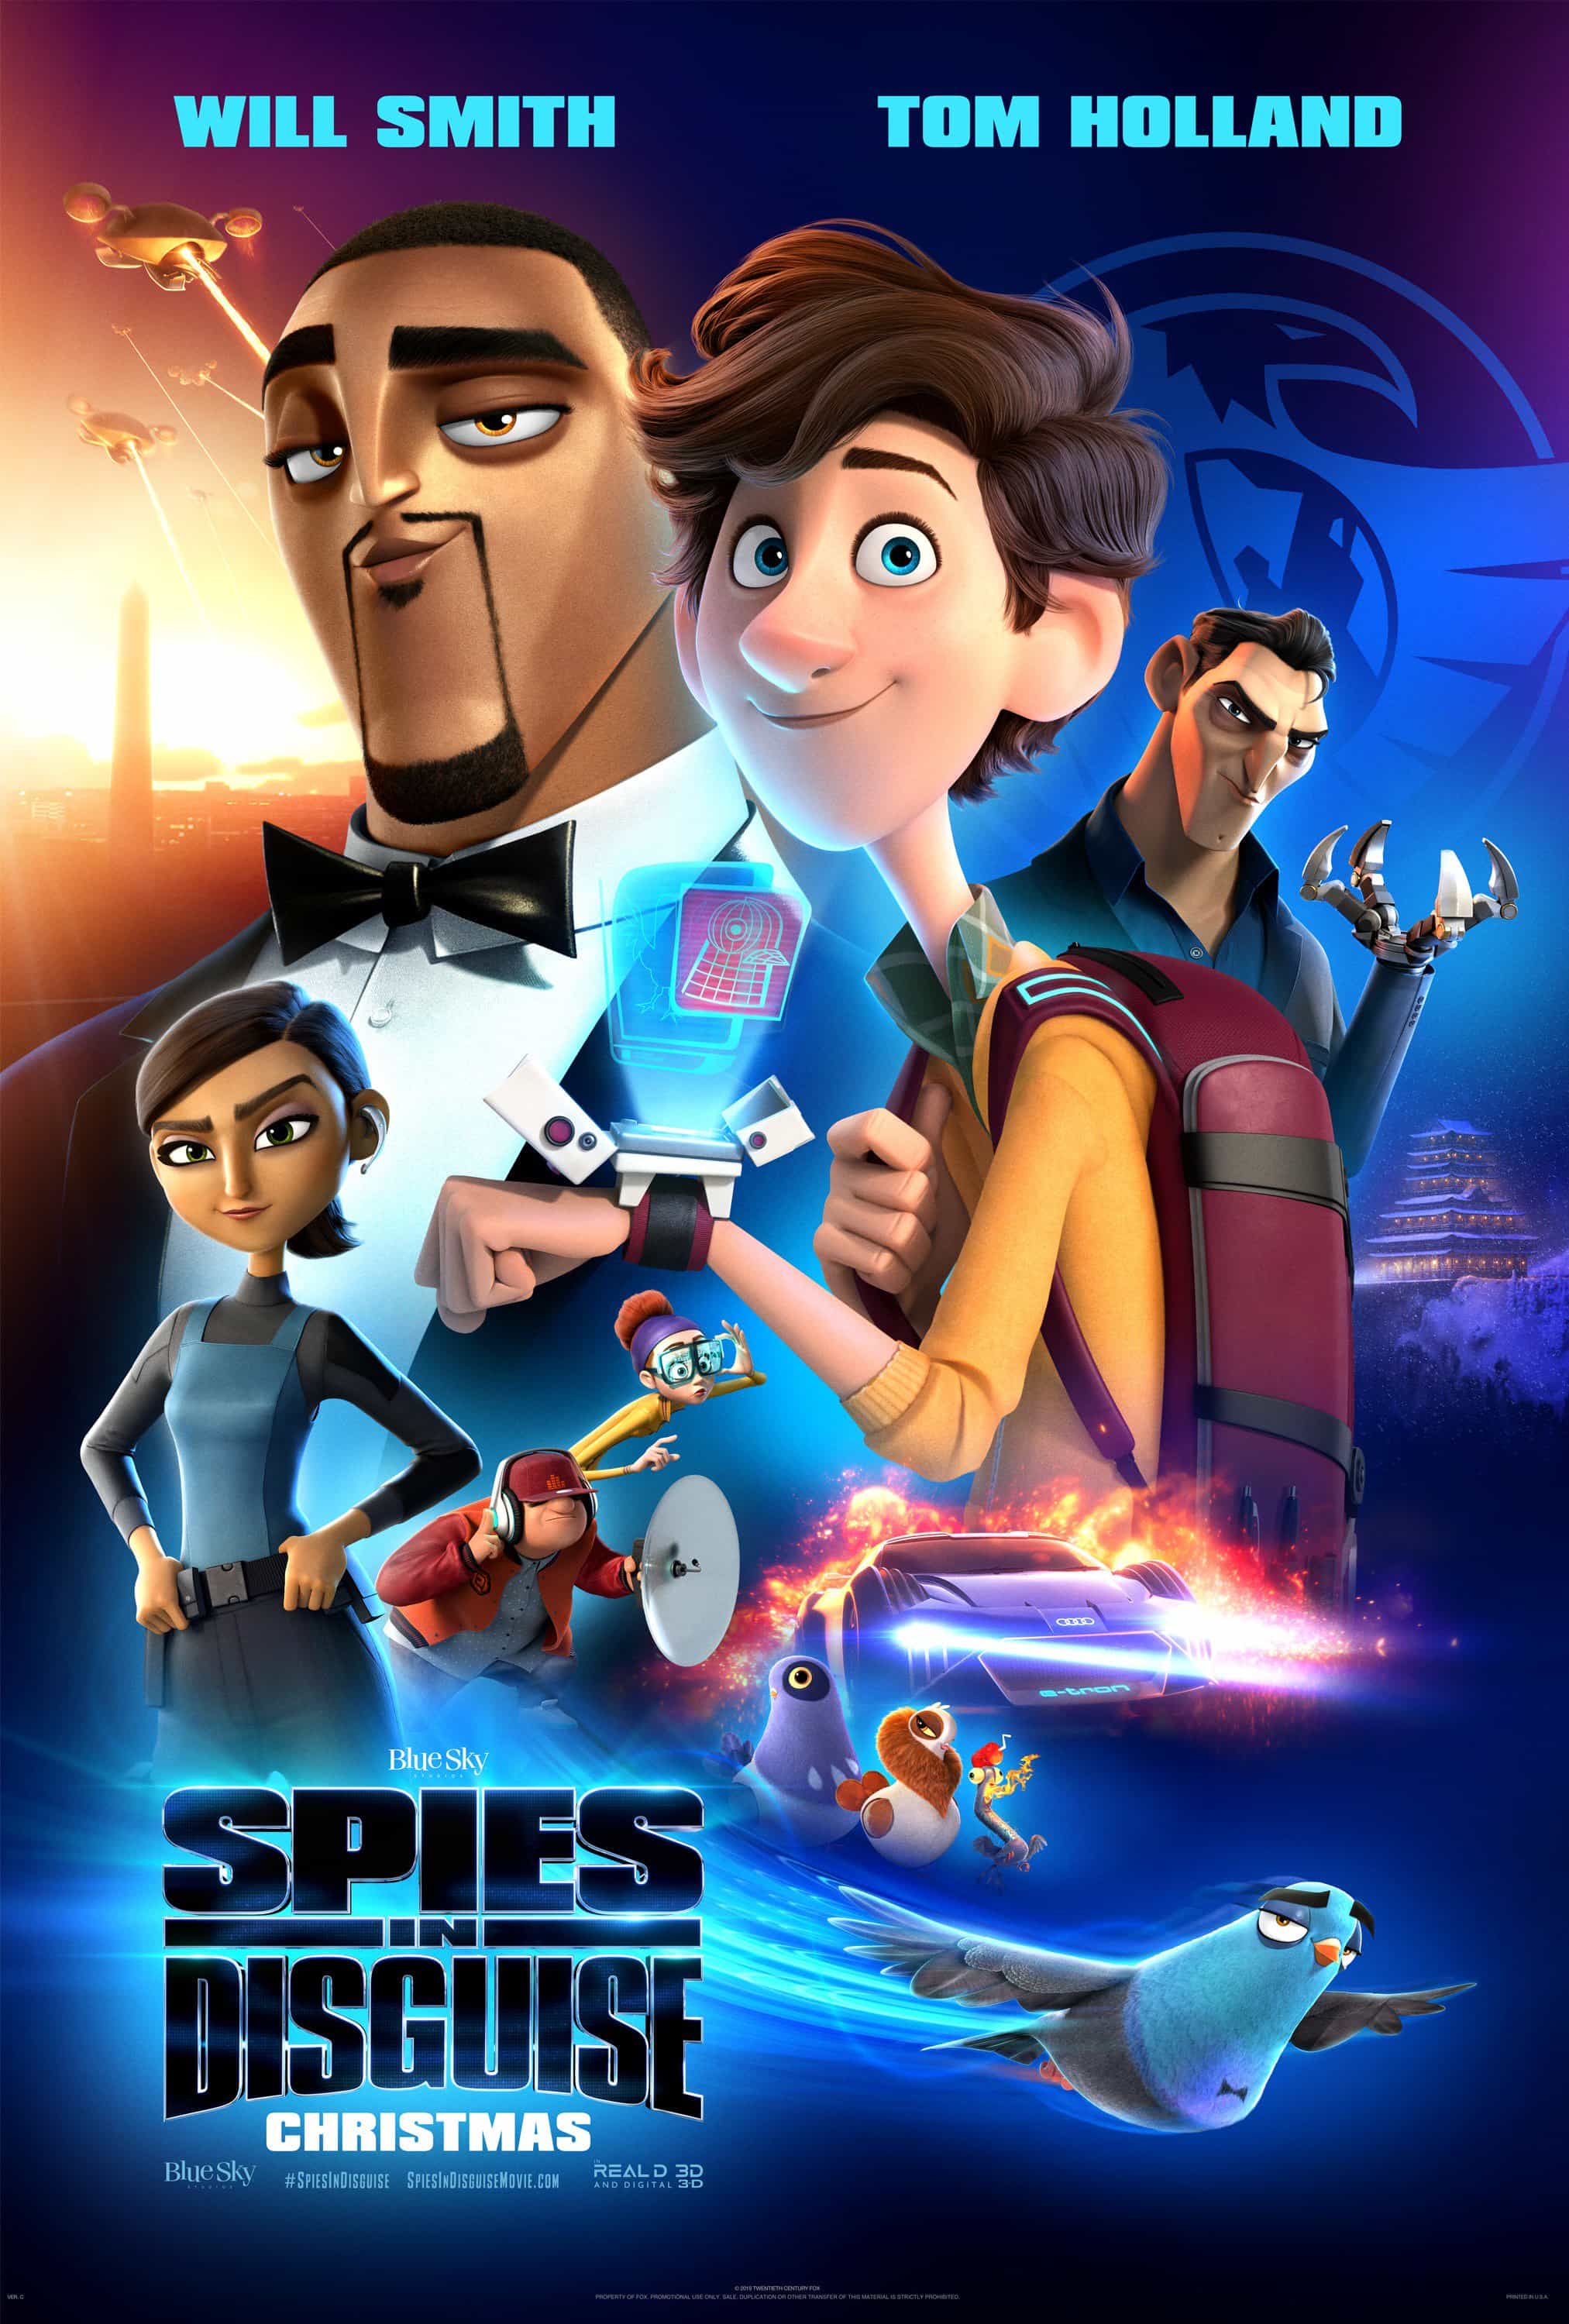 Spies In Disguise is given a PG age rating in the UK for mild violence, threat, rude humour